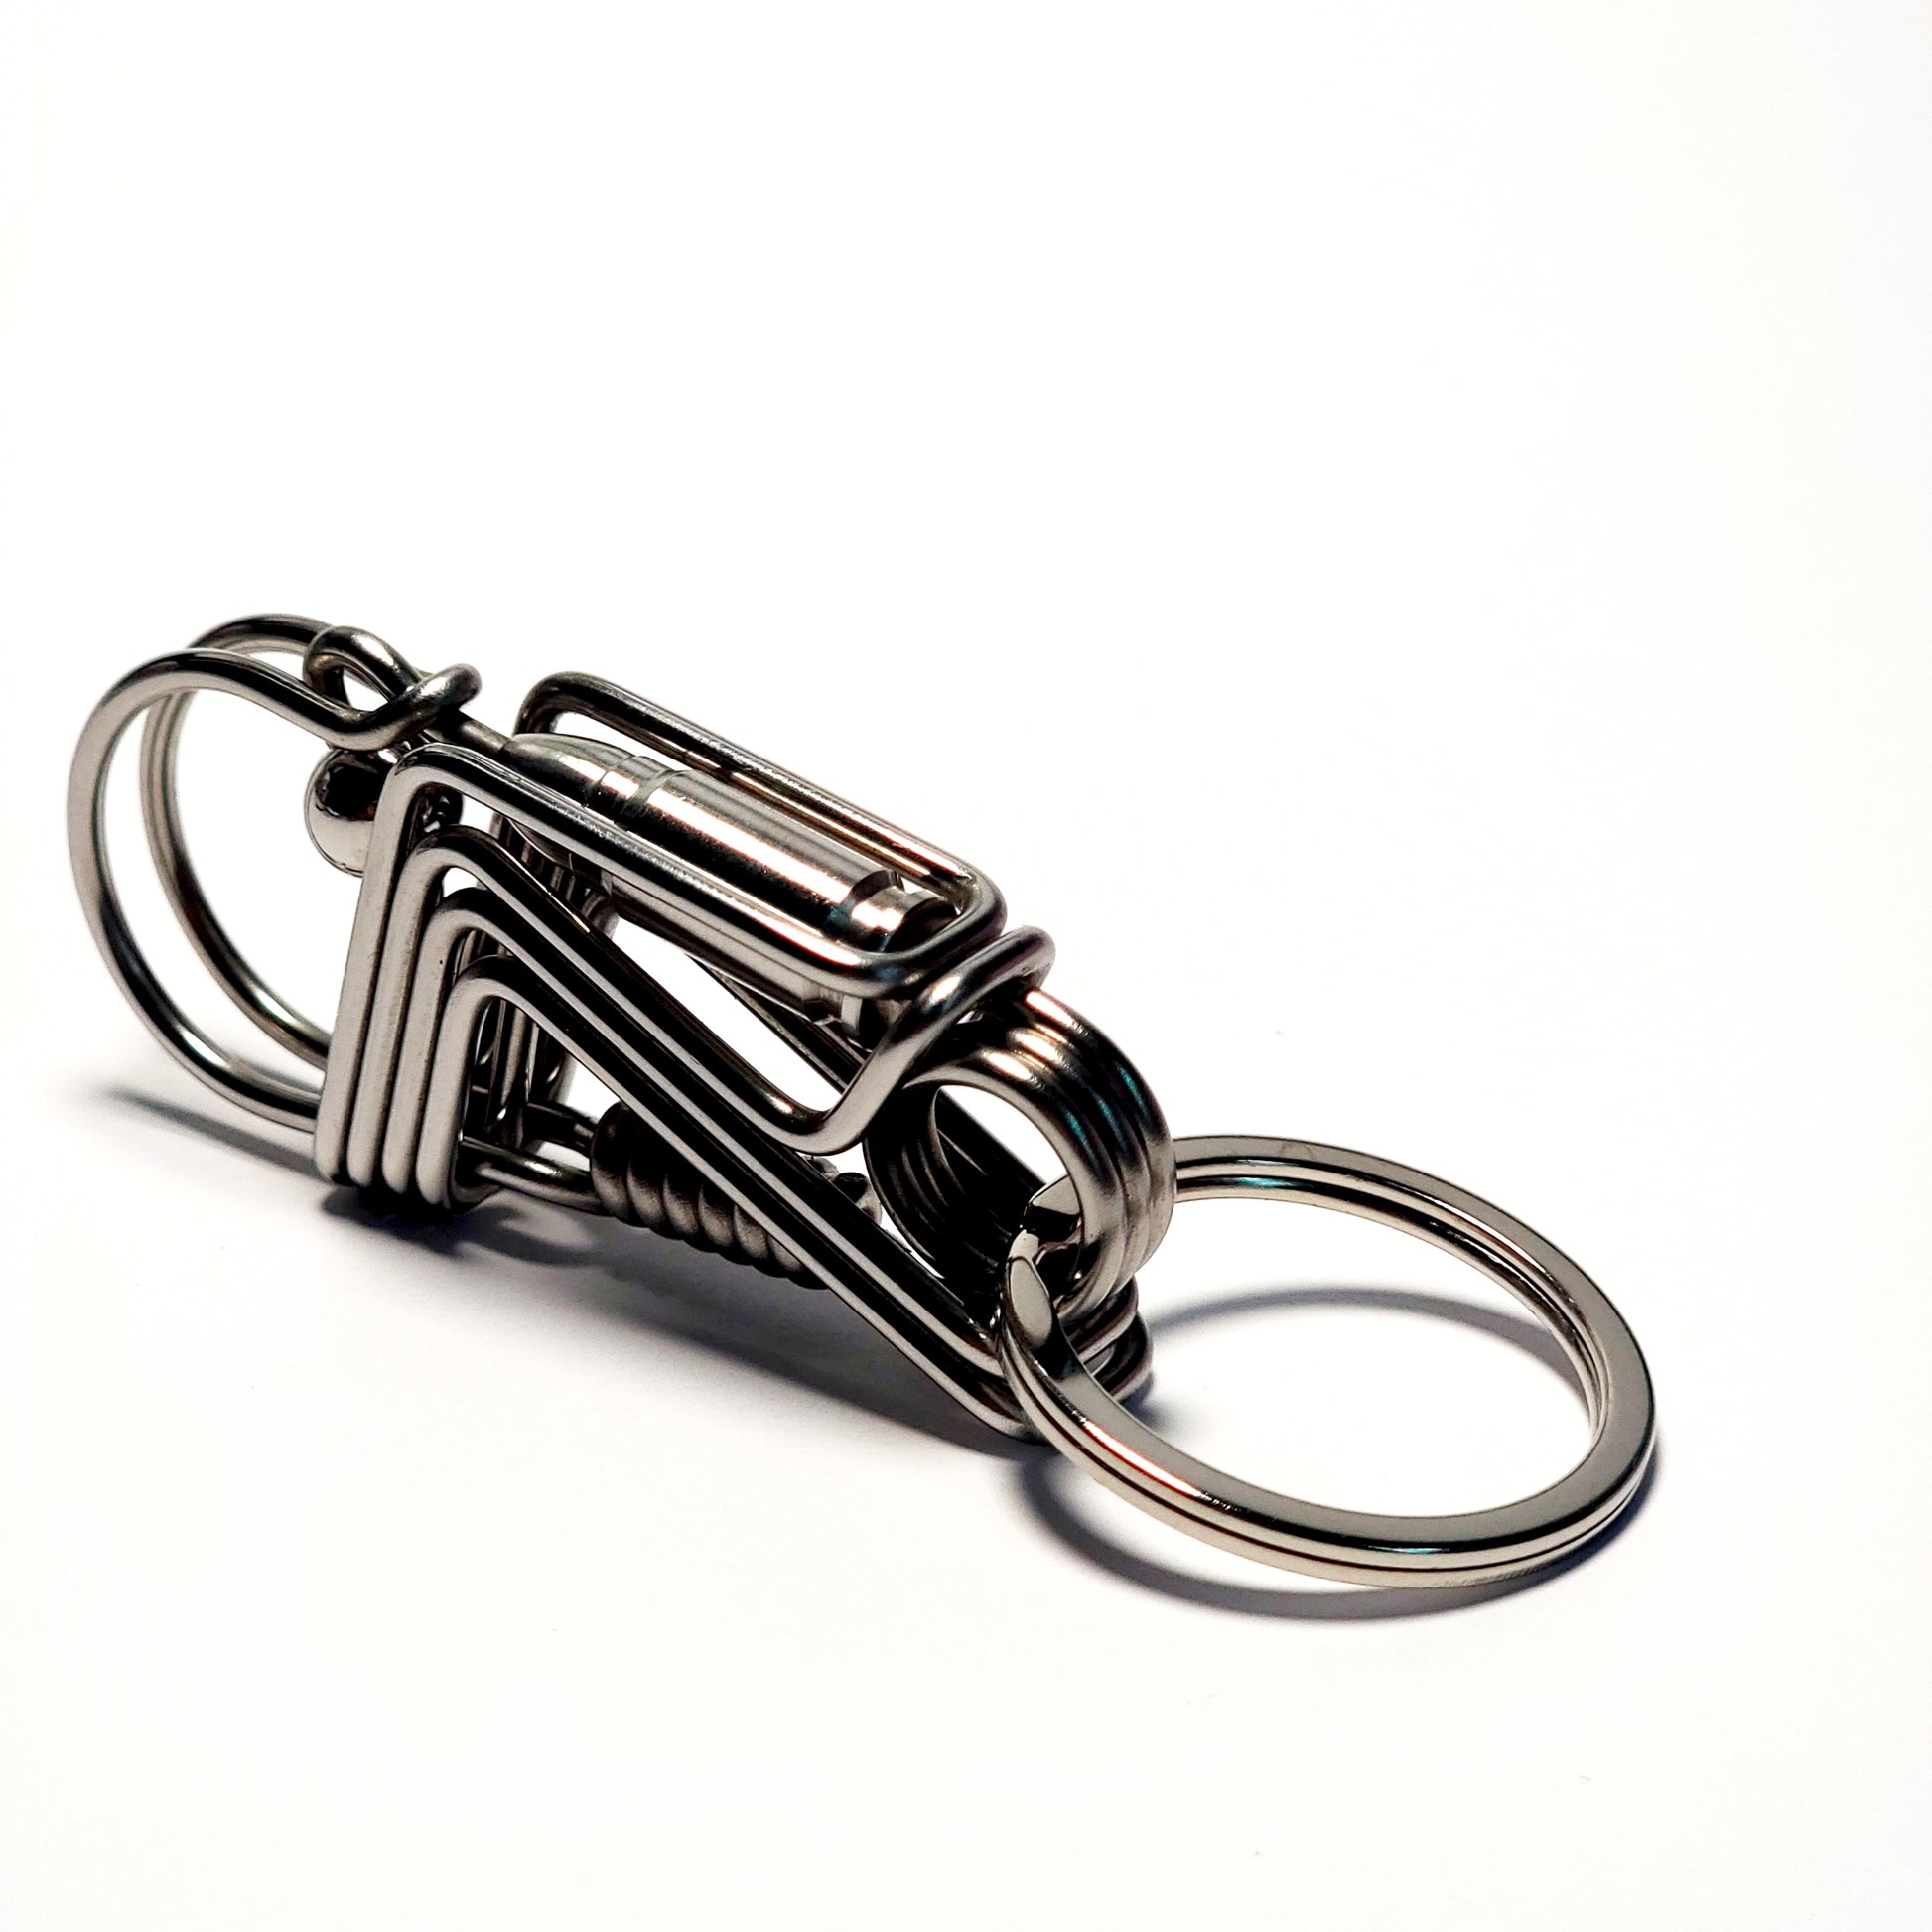 Homemade Bullet style wire keychain